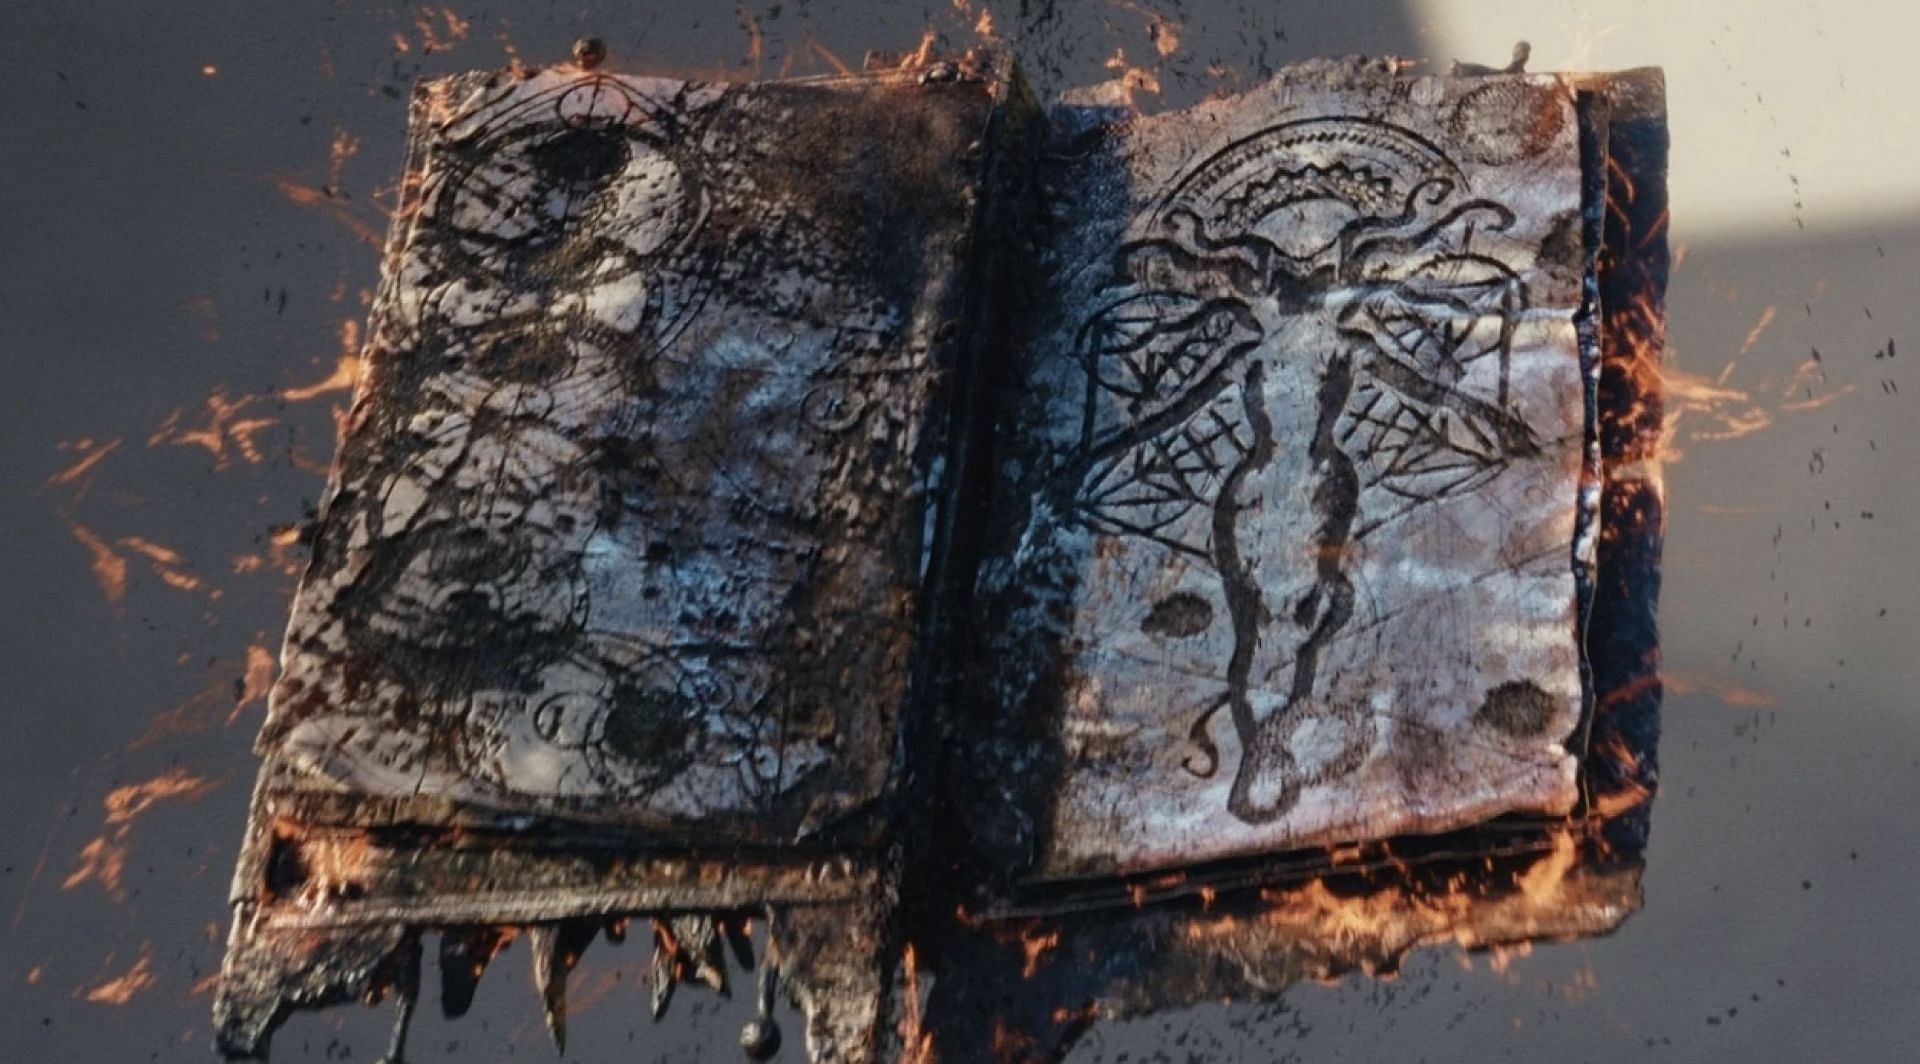 The book of spells containing transcribed dark magic based on ancient engravings carved by Chthon. (Image via Marvel Studios)